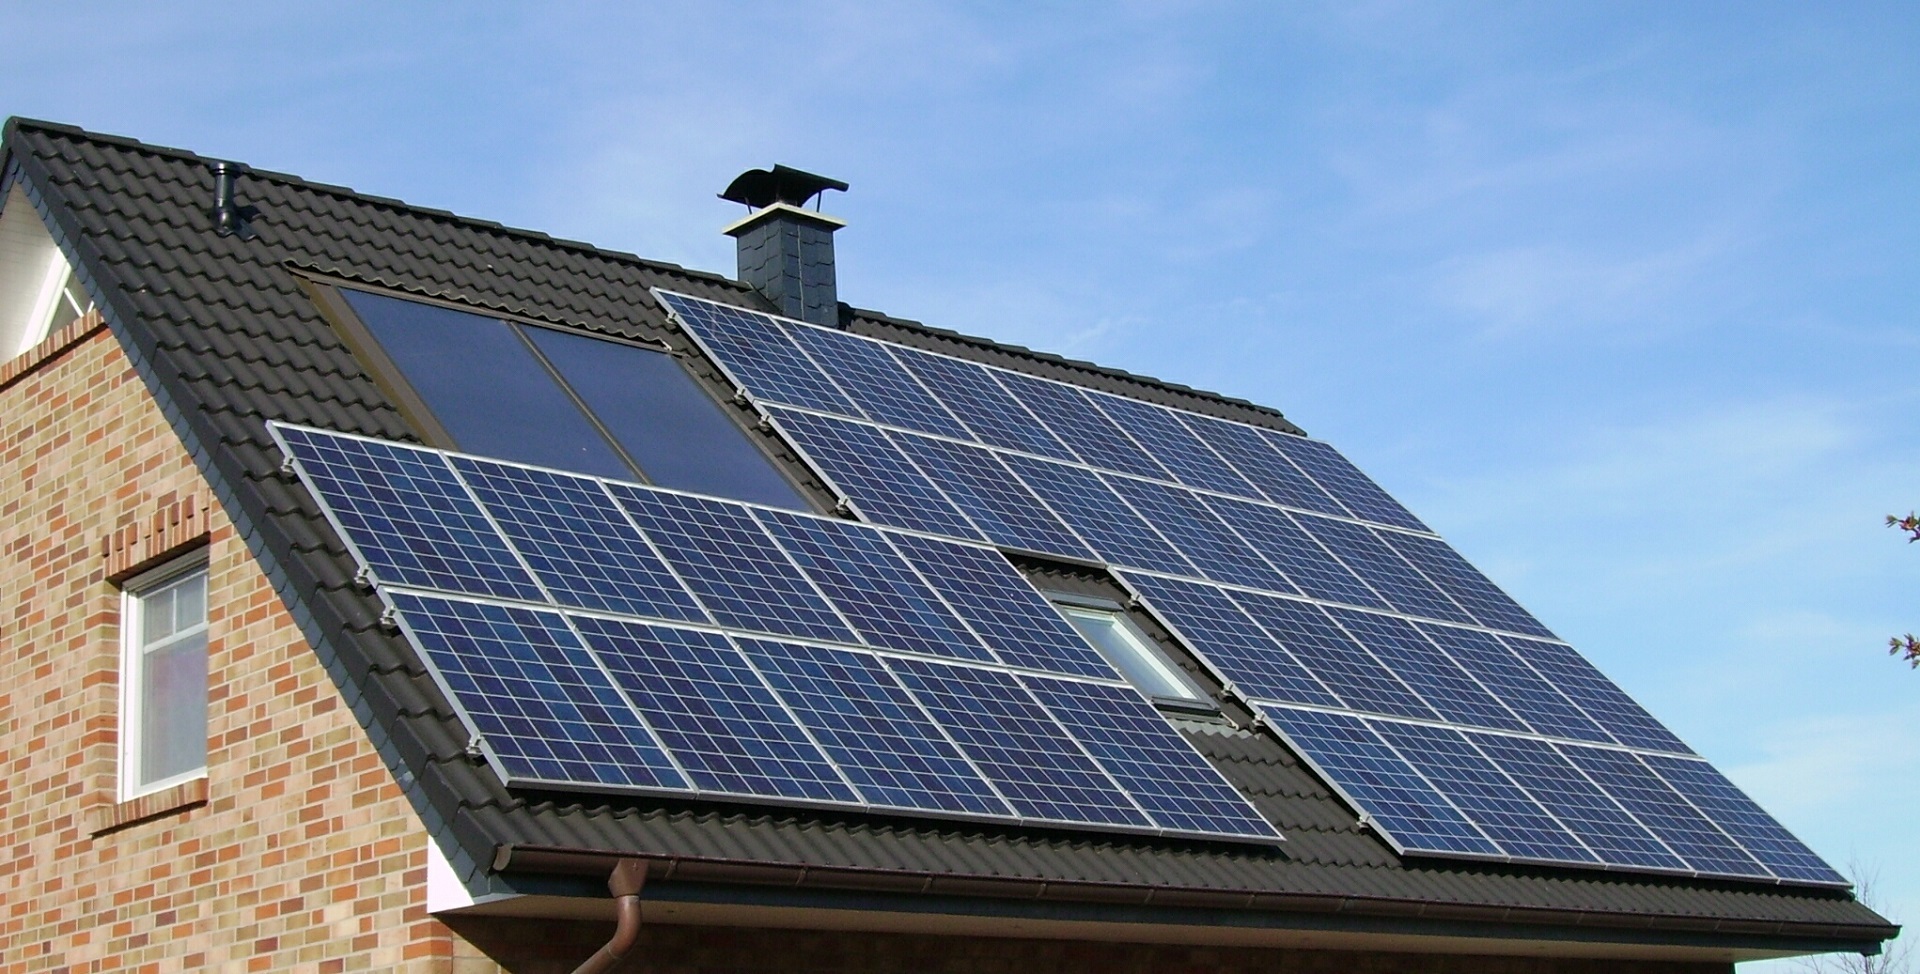 How to Choose the Perfect a Solar System for Home Electricity